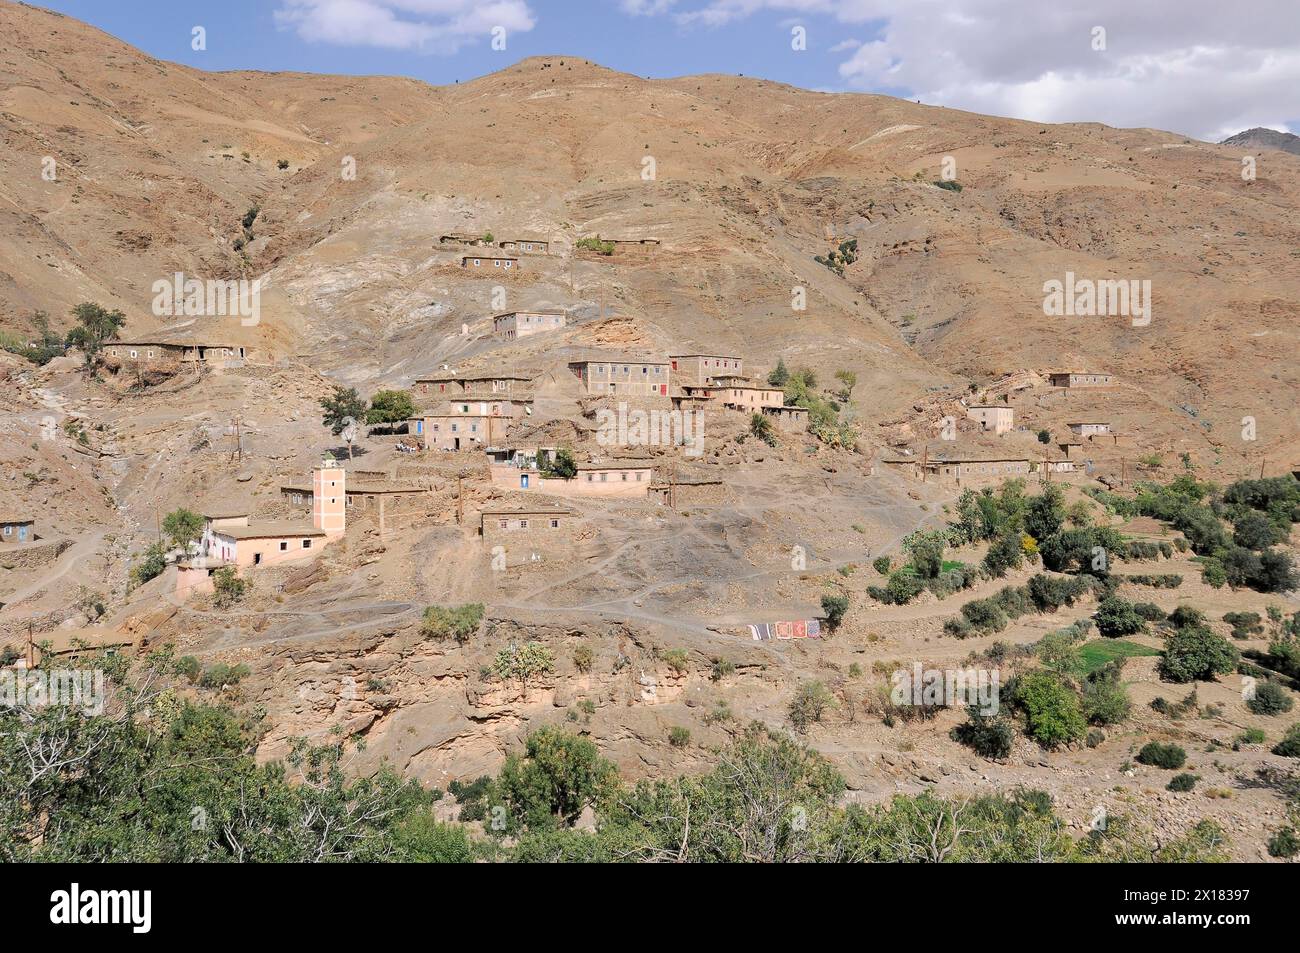 A remote mountain village with traditional houses nestled in hilly terrain, Southern High Atlas, Morocco Stock Photo